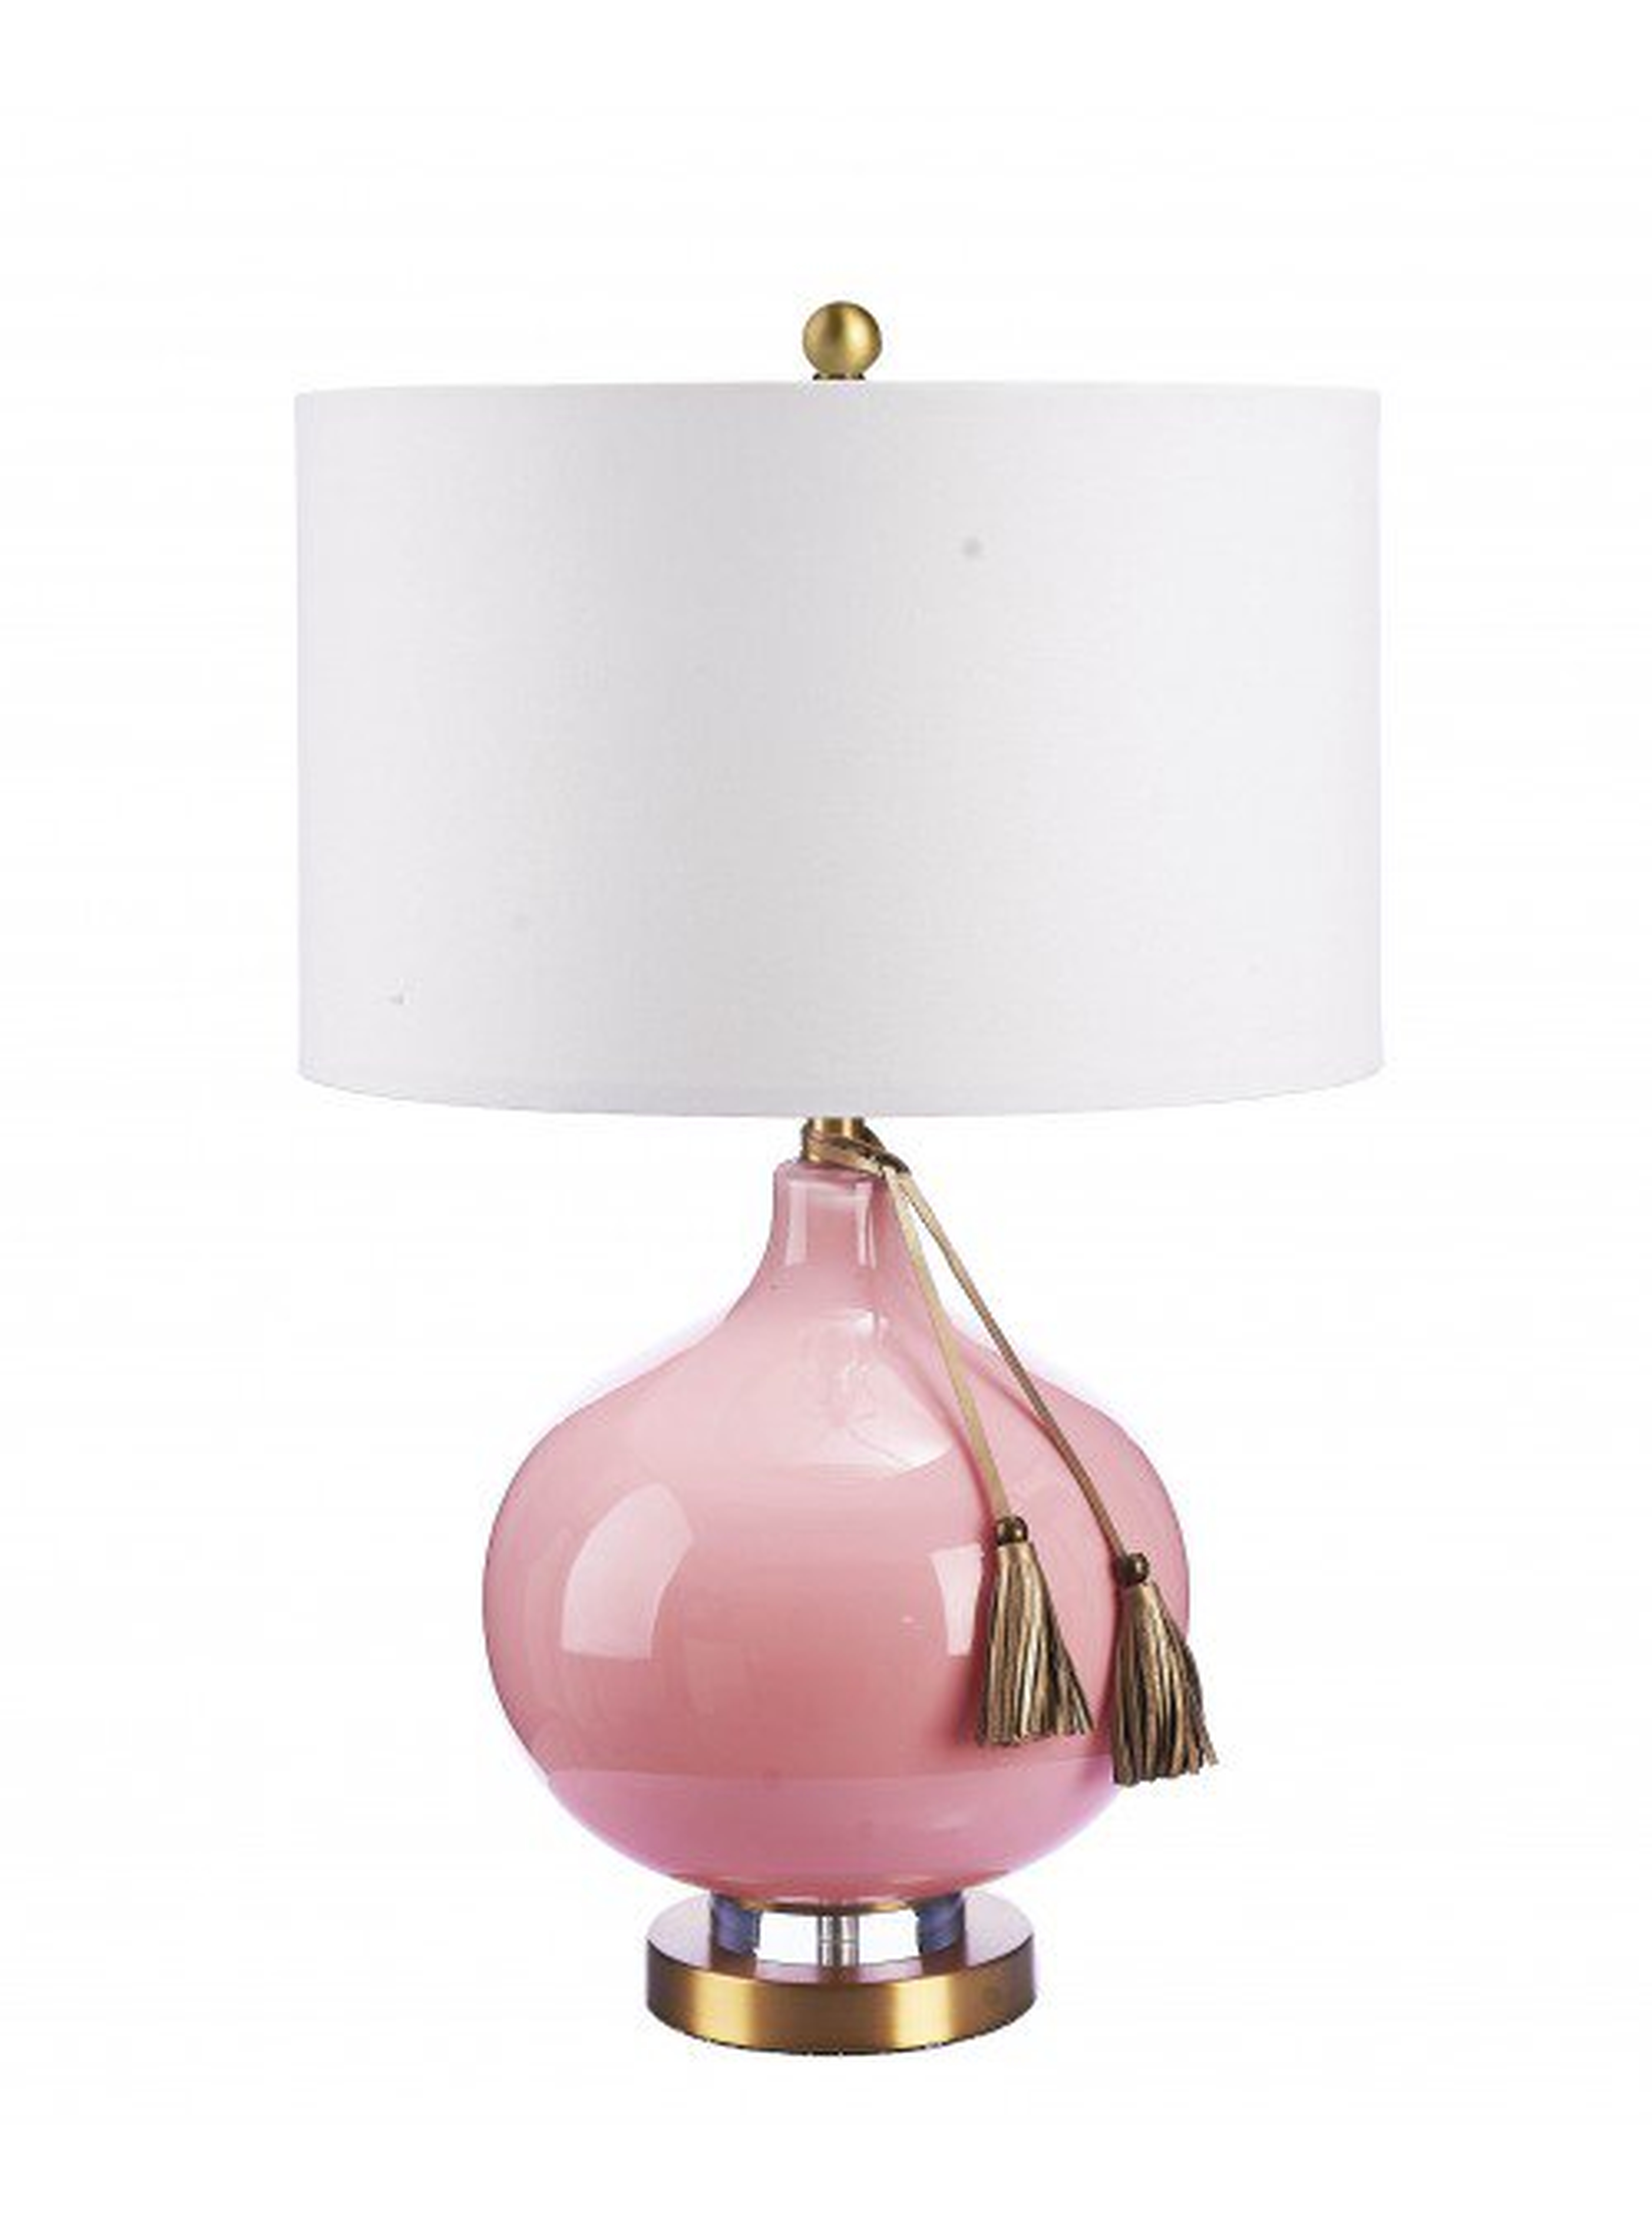 CUPCAKES AND CASHMERE TASSEL TABLE LAMP - Lulu and Georgia